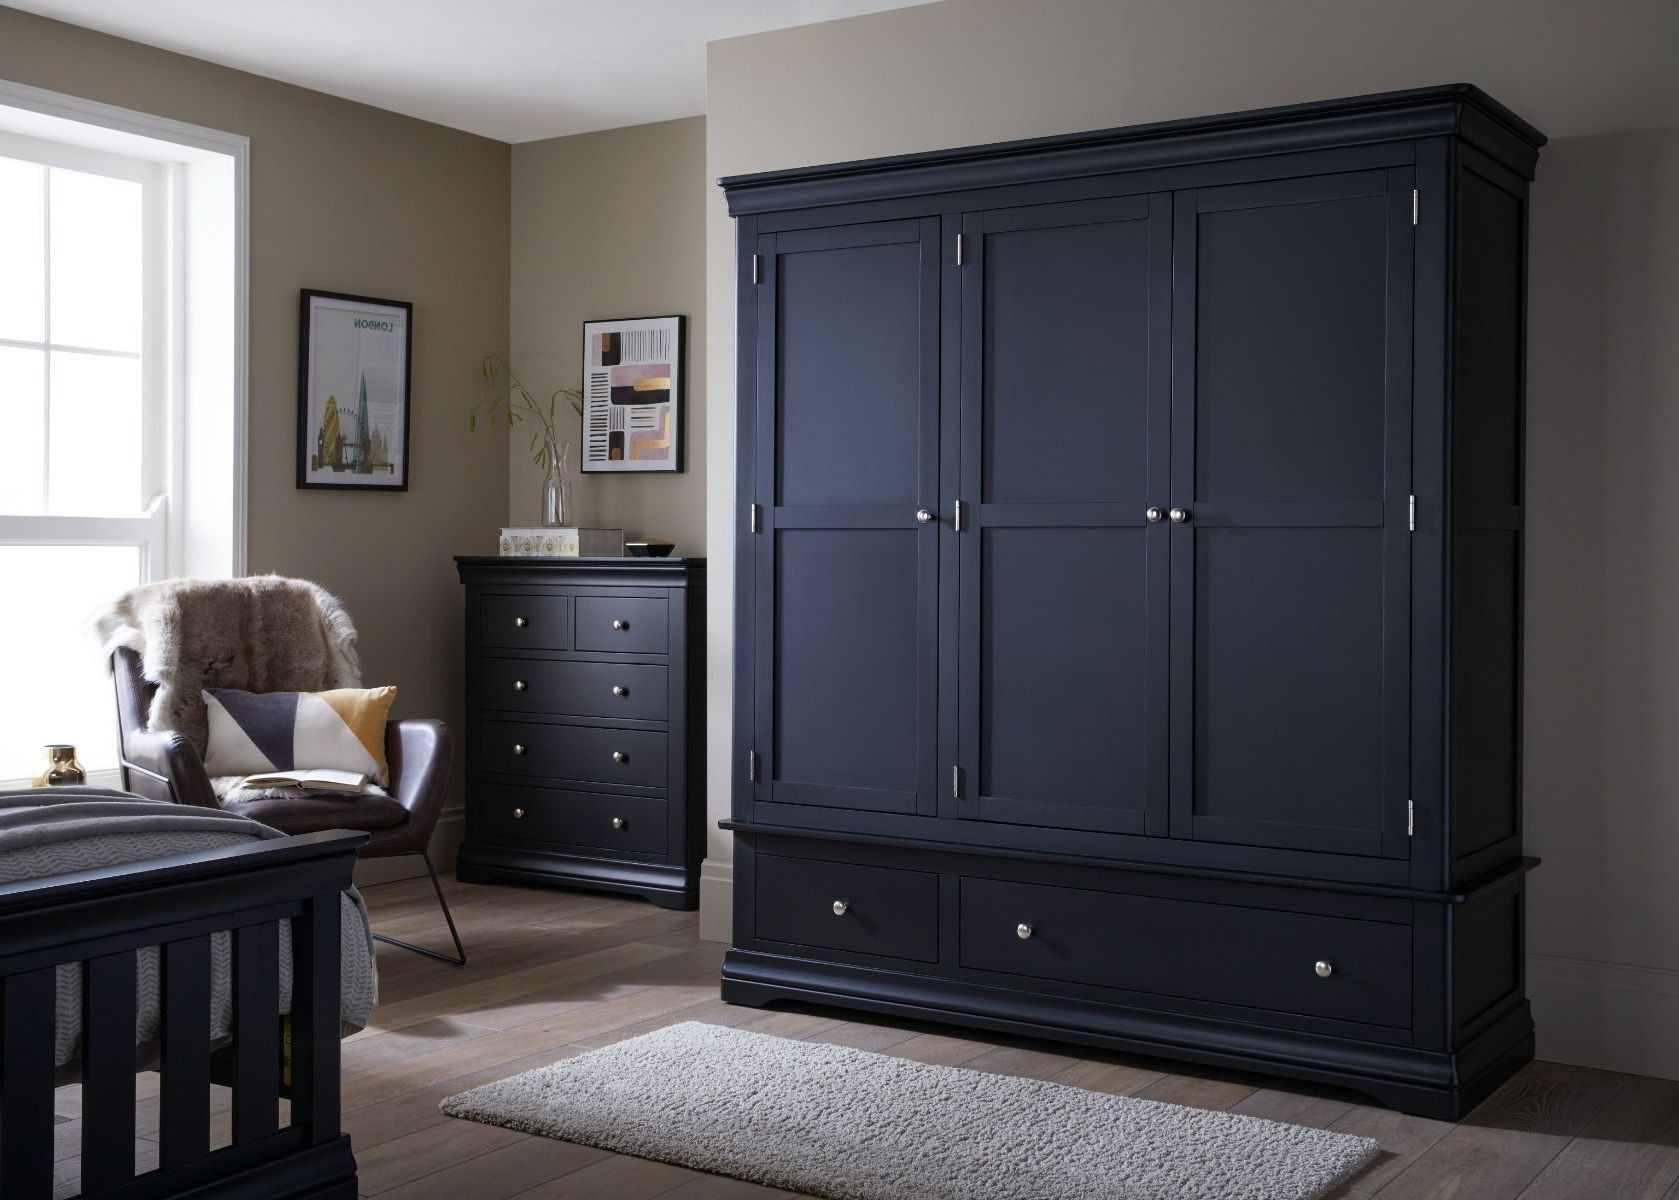 Toulouse Black Painted Large Triple Wardrobe With Drawer Throughout Cheap Wardrobes With Drawers (View 13 of 20)